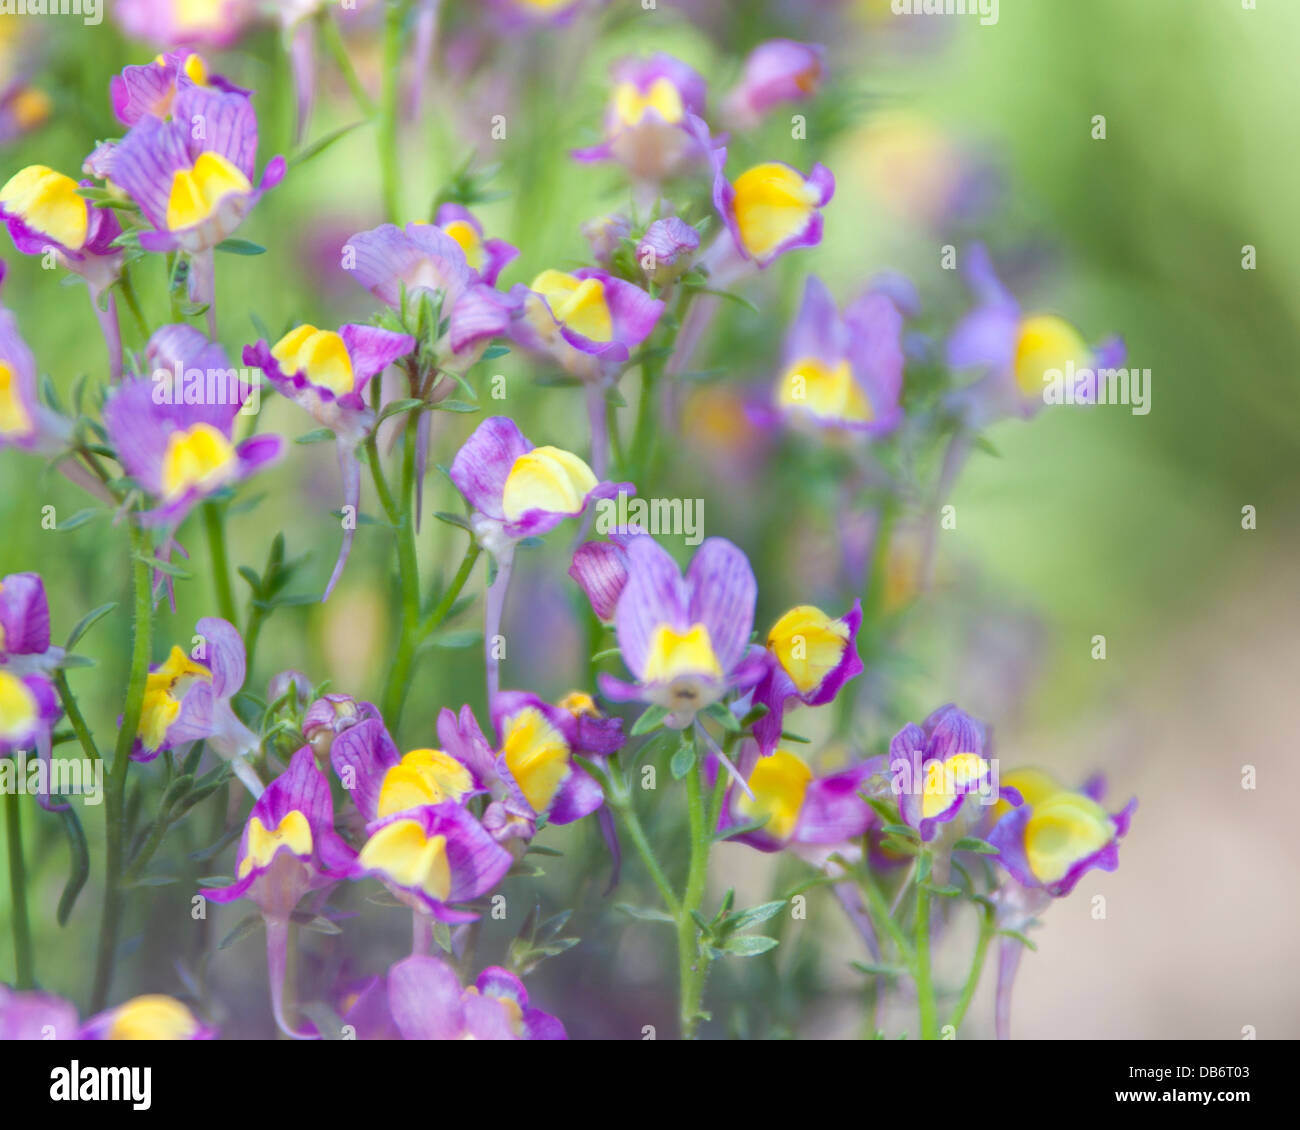 Garden photograph of delicate purple and yellow flowers Stock Photo